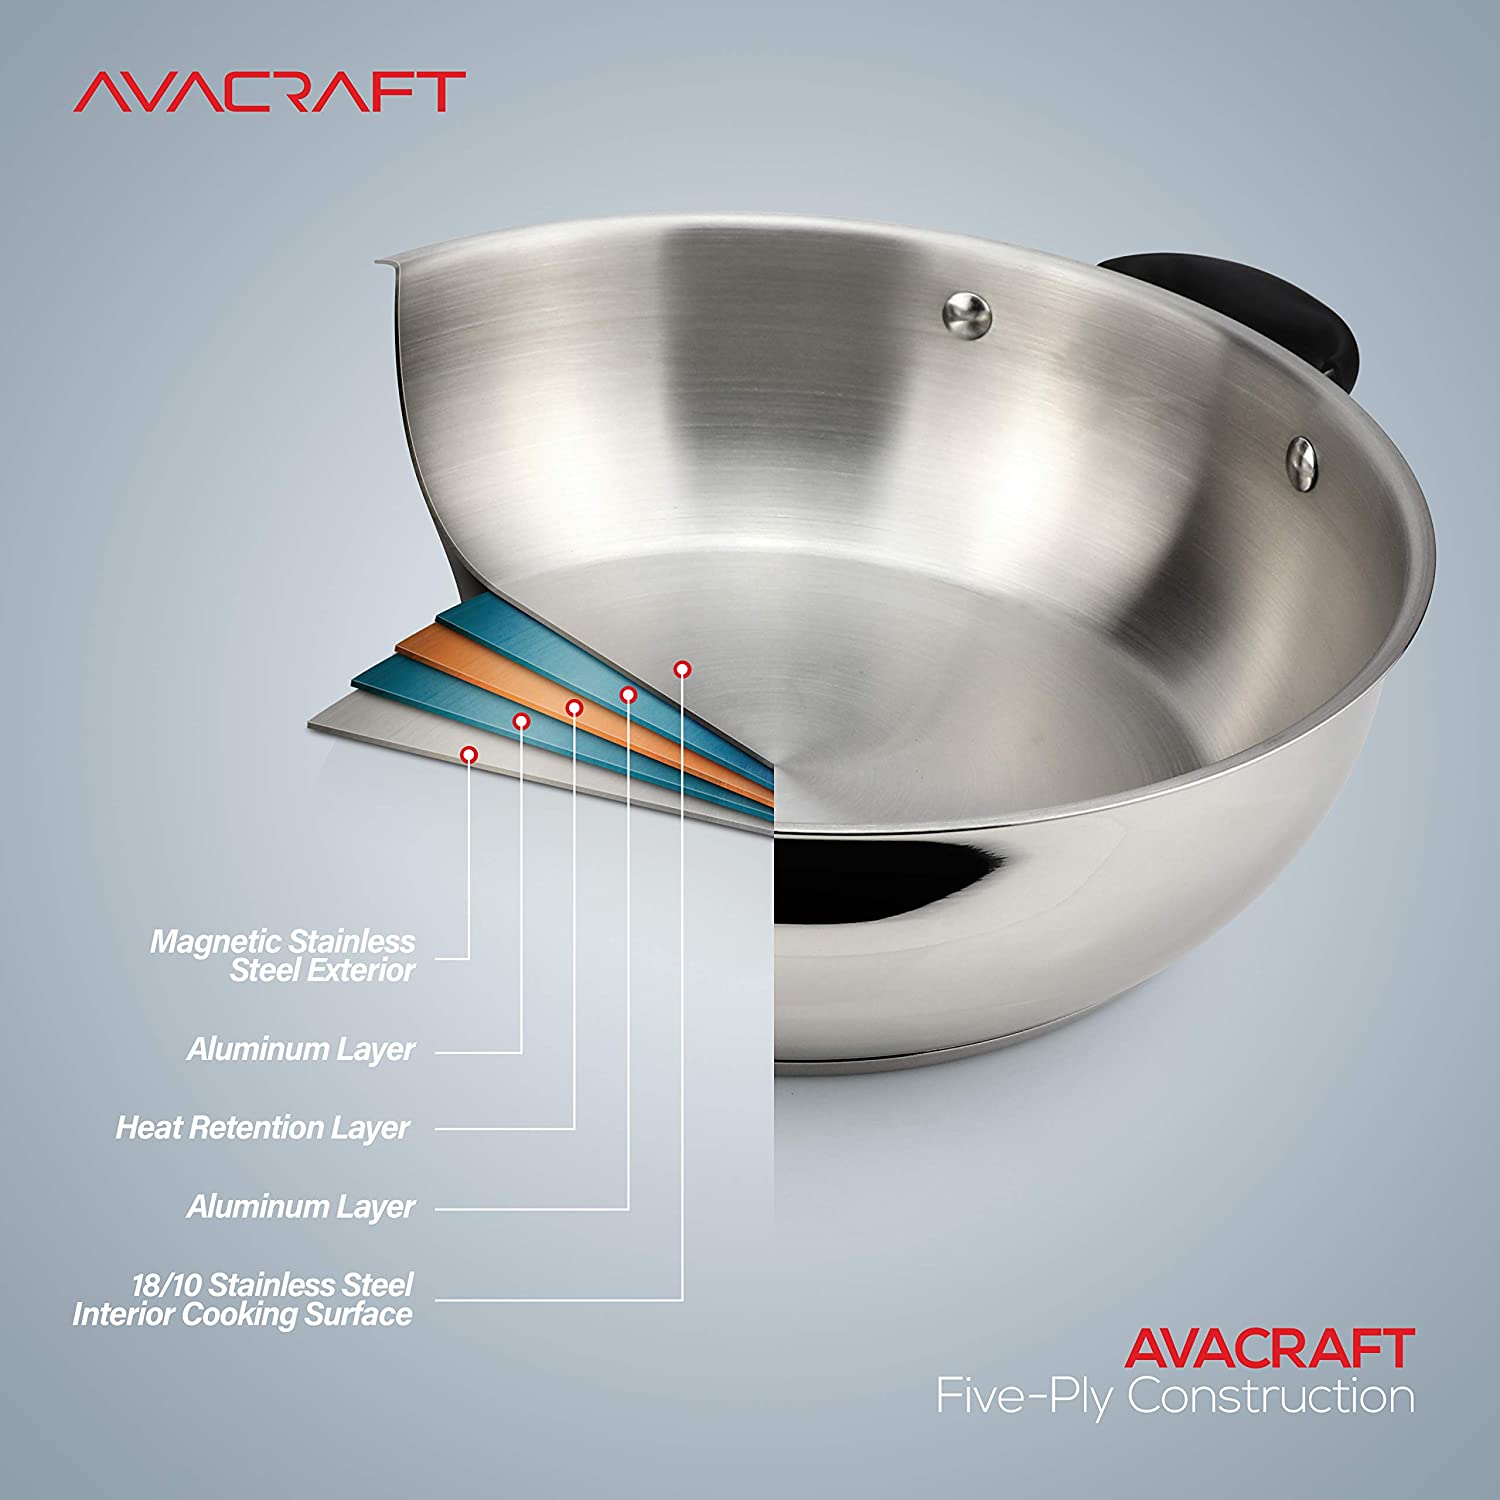 AVACRAFT 18/10 Stainless Steel Everyday Pan Stir Fry Pan with Five-Ply Base